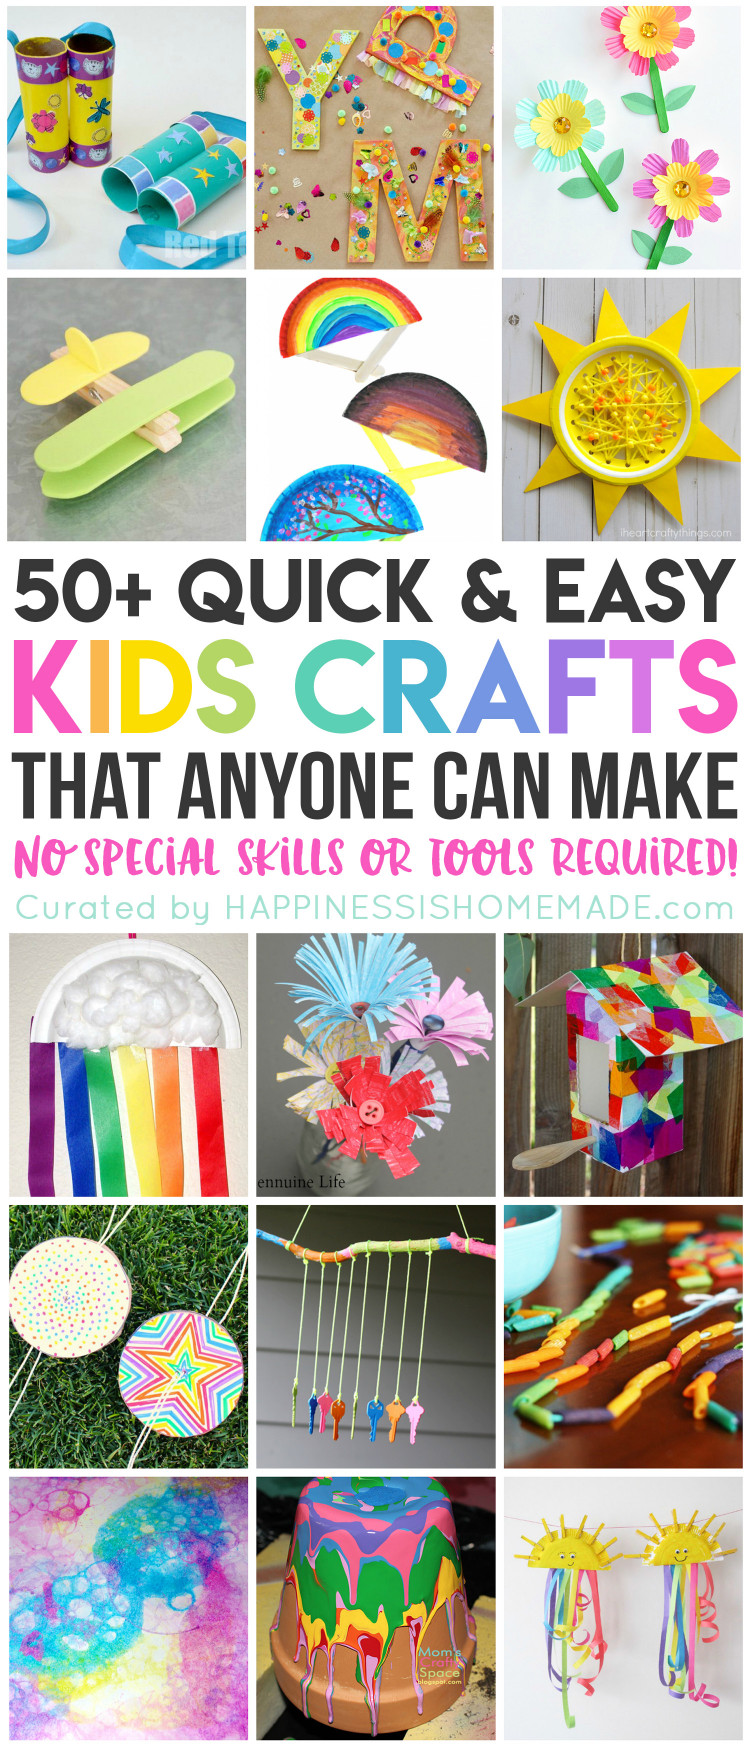 Easy Kids Crafts
 50 Quick & Easy Kids Crafts that ANYONE Can Make